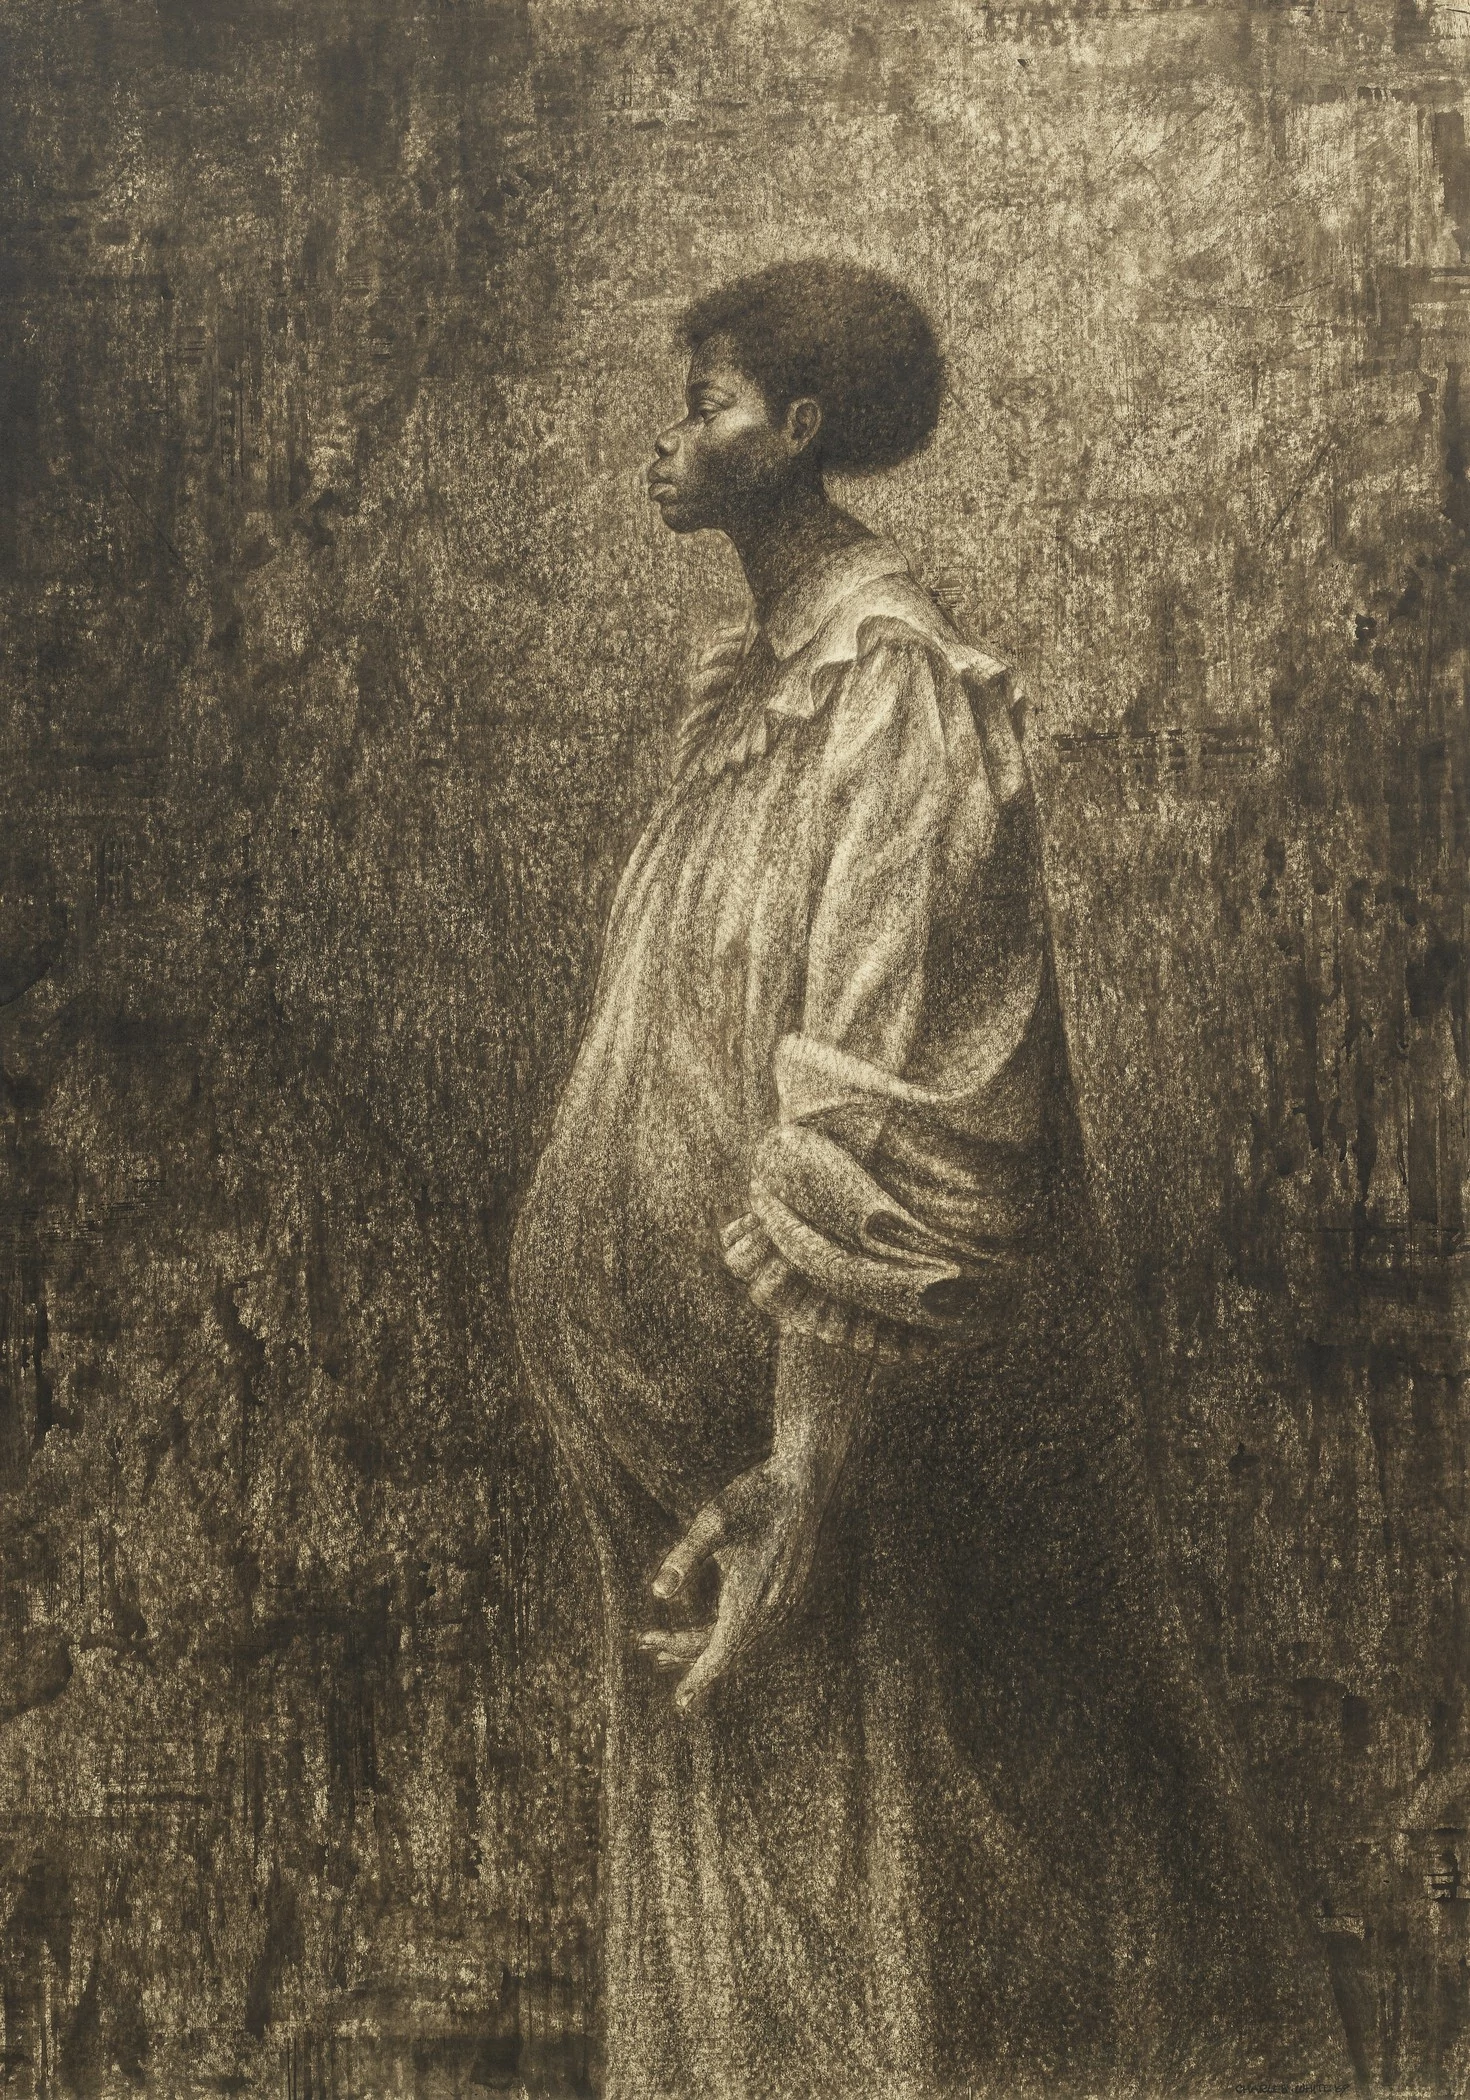 Seed of Love, Charles White